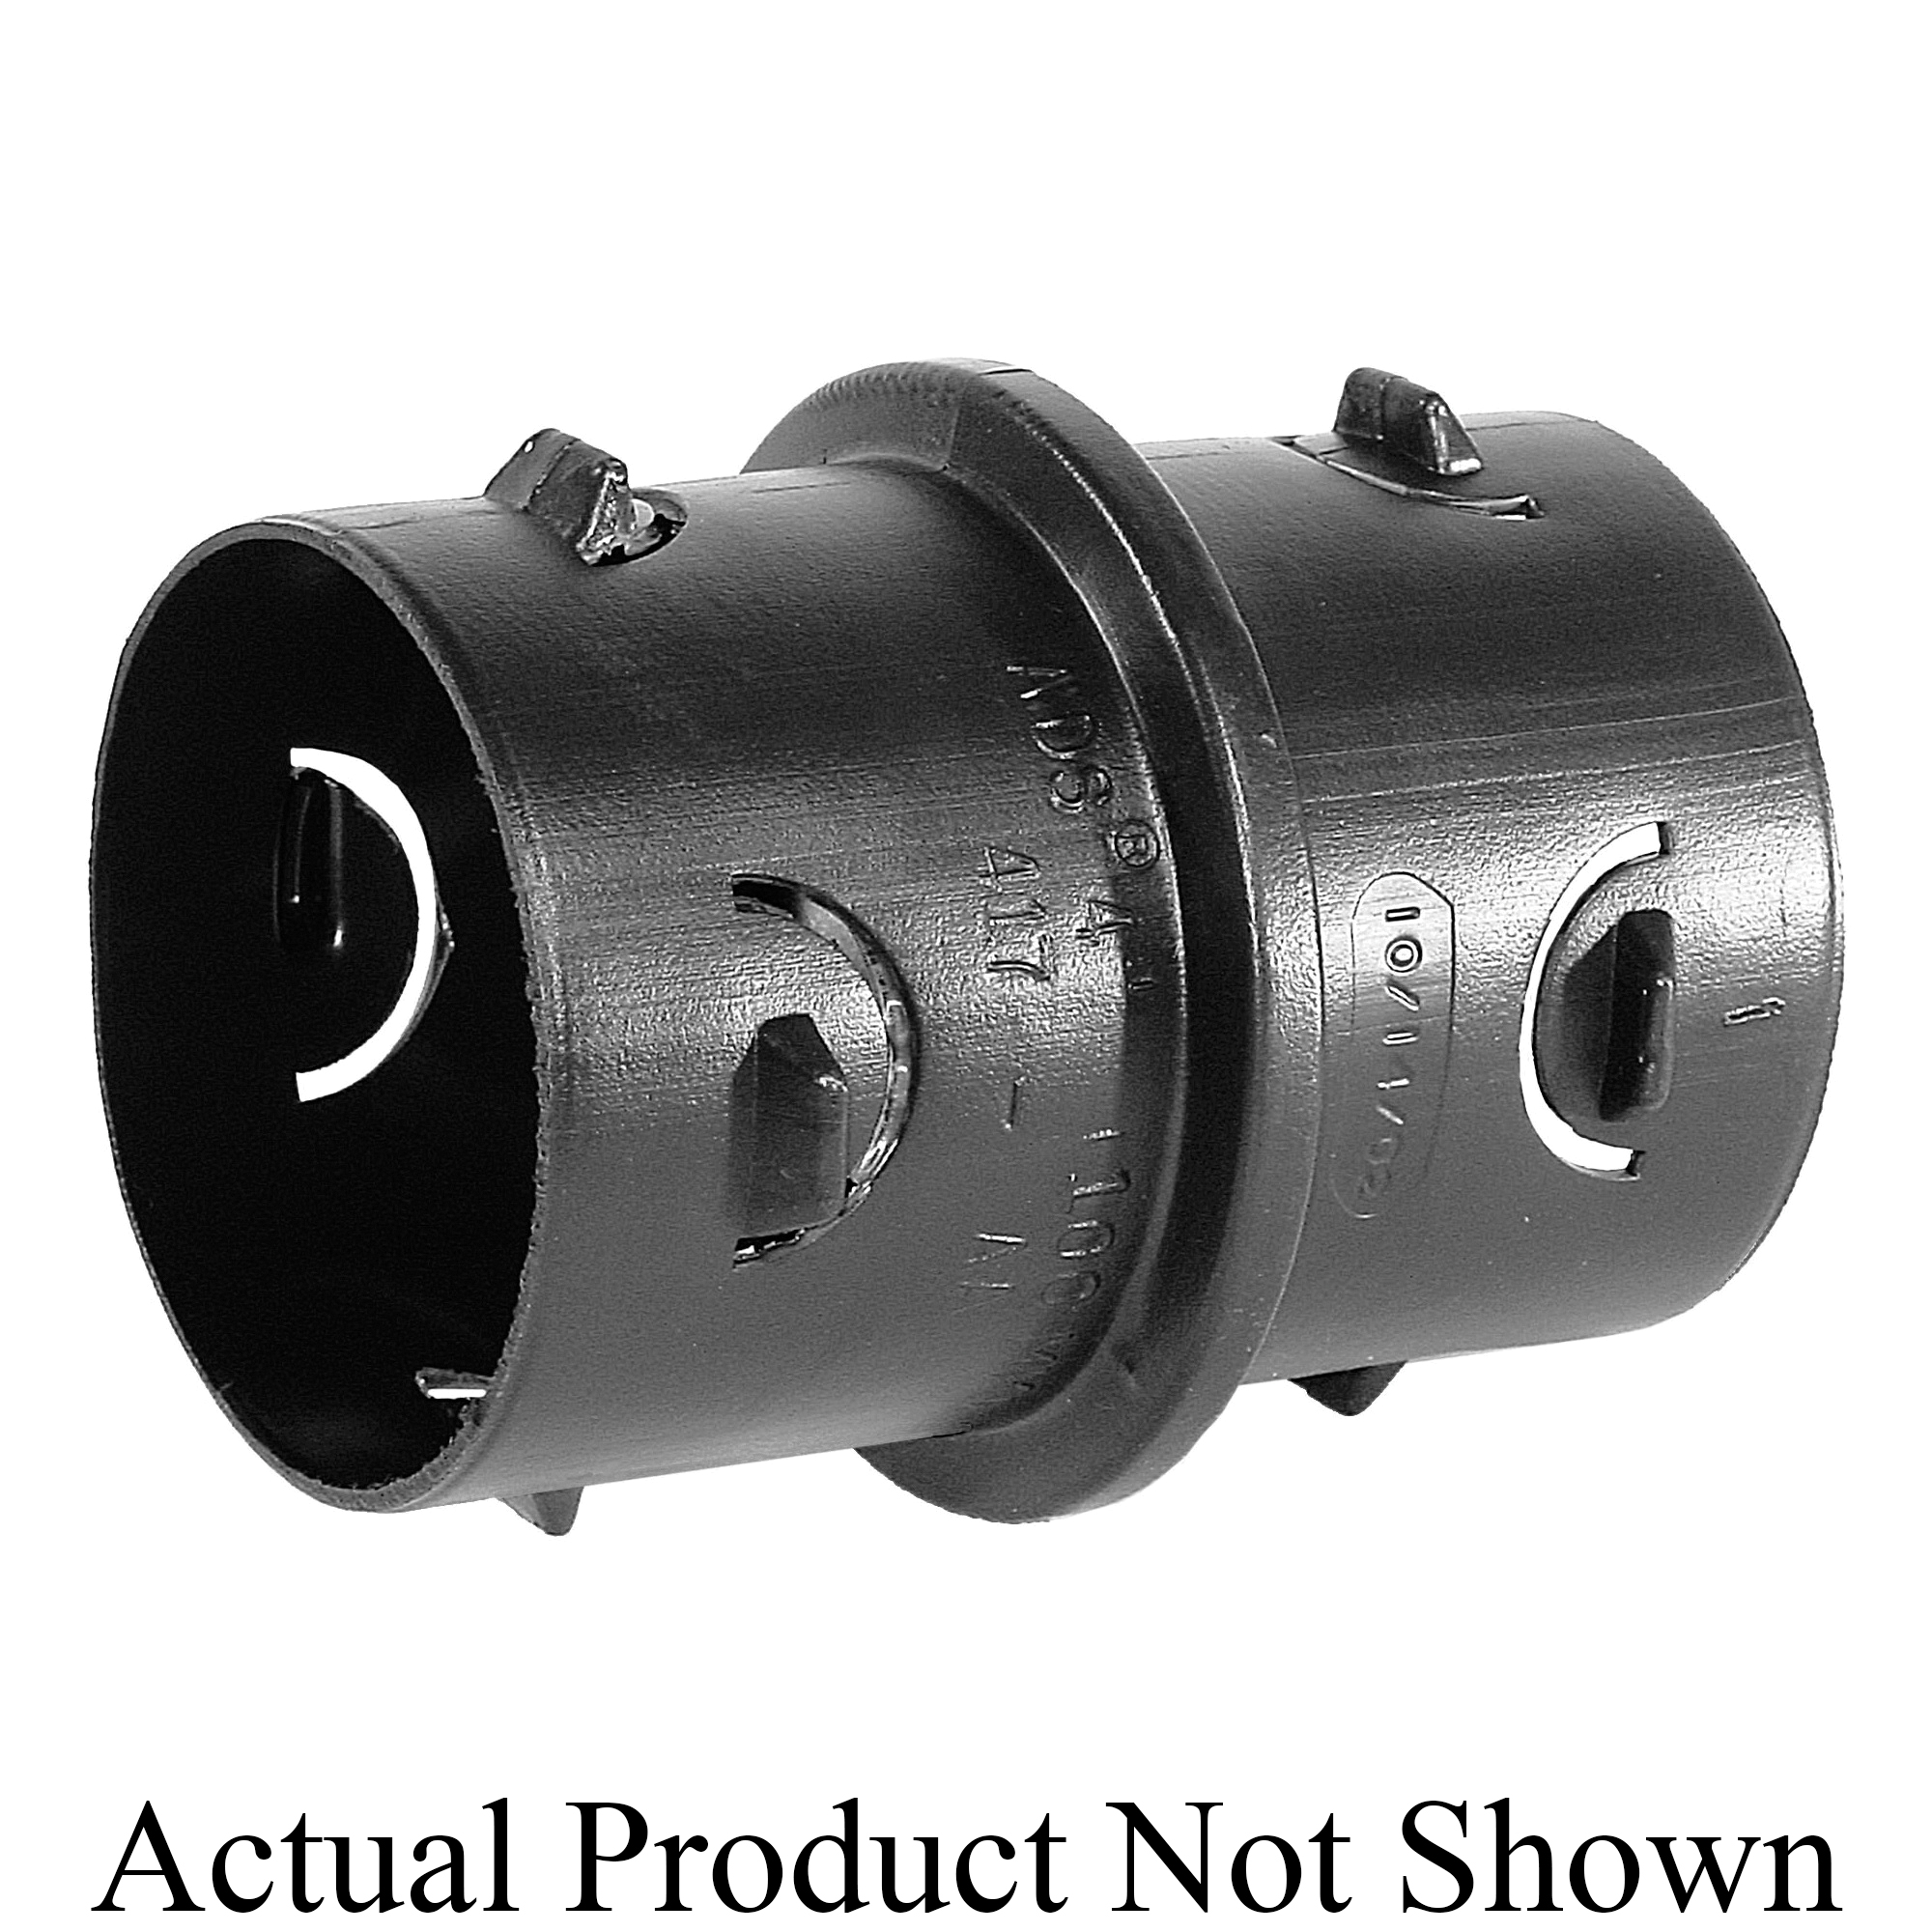 ADS® 0816AA Snap Reducing Coupler, For Use With Single Wall Pipe, 8 x 6 in, HDPE, Domestic